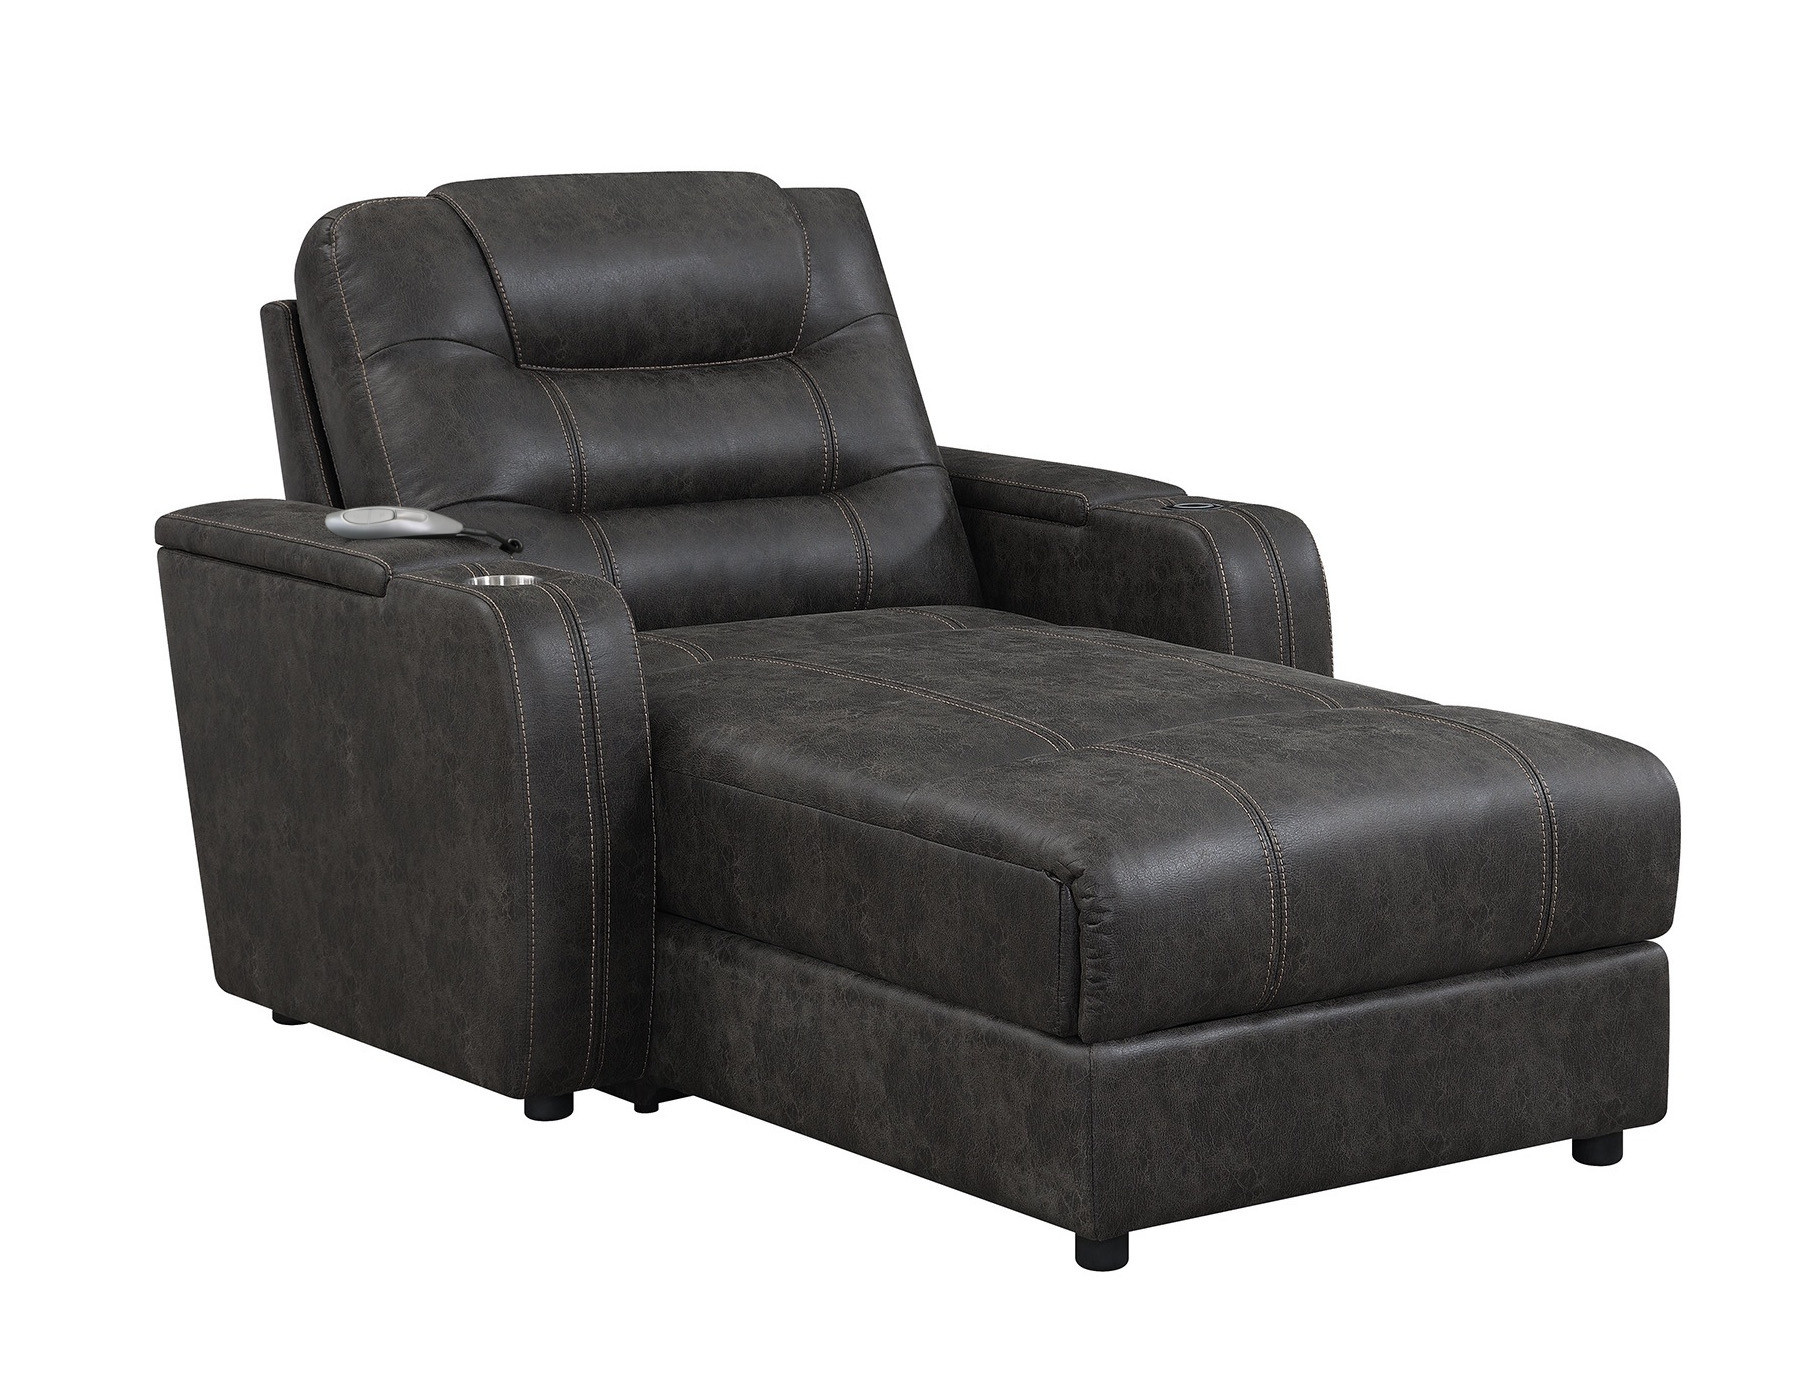 Su K1128045ls Power Reclining Chaise Lounge Chair With Arms Wholesale Furniture Mattress